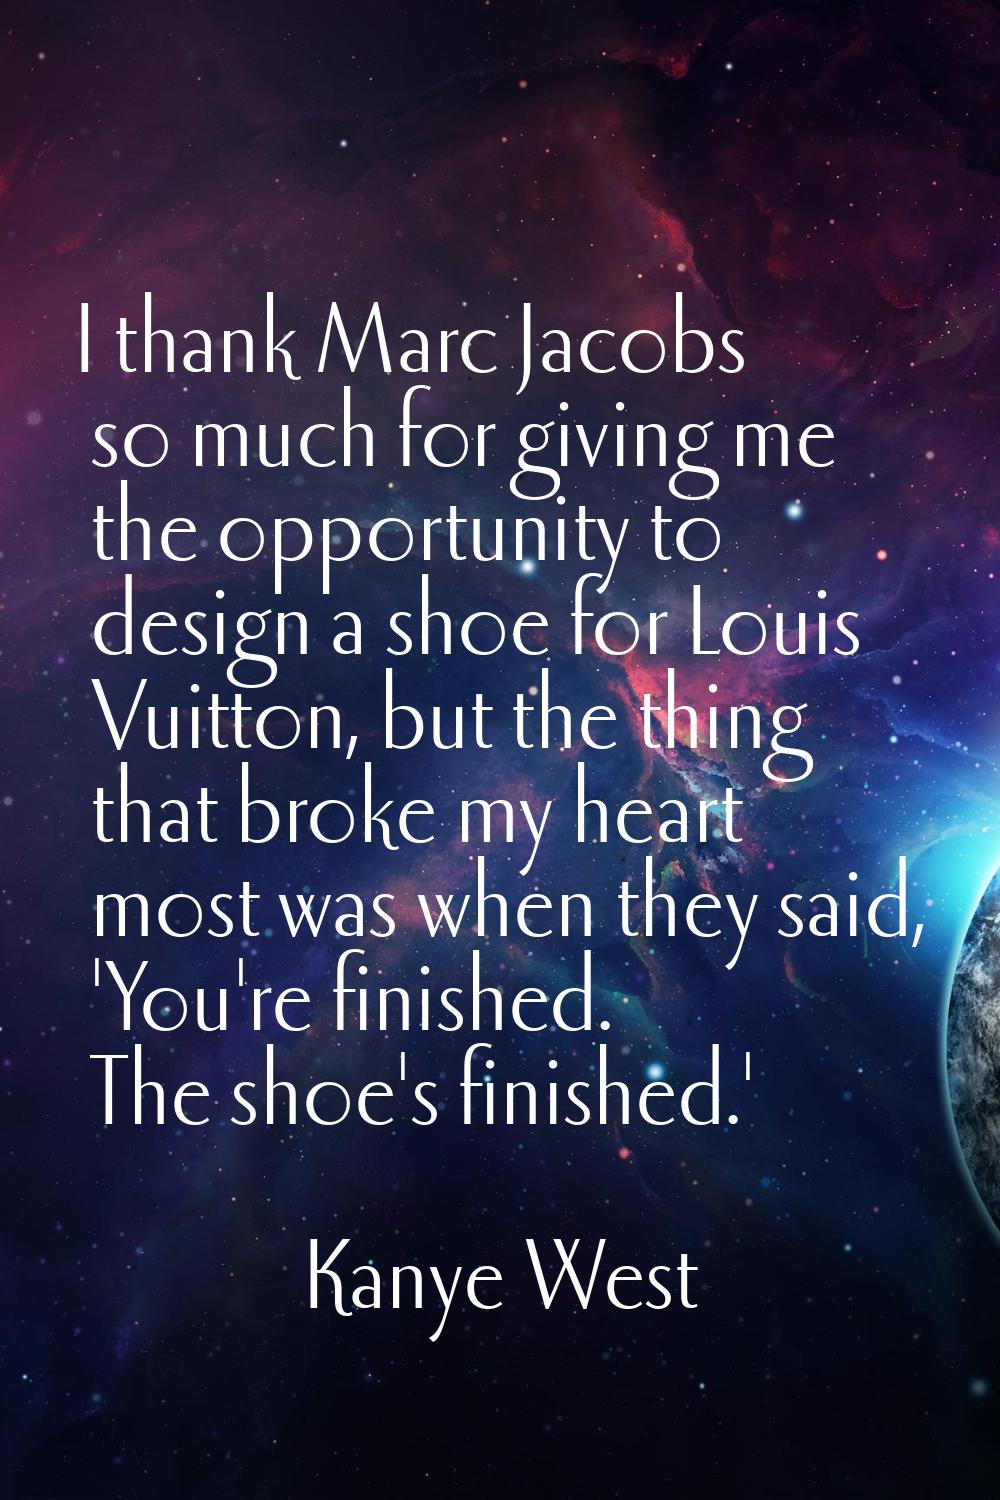 I thank Marc Jacobs so much for giving me the opportunity to design a shoe for Louis Vuitton, but t